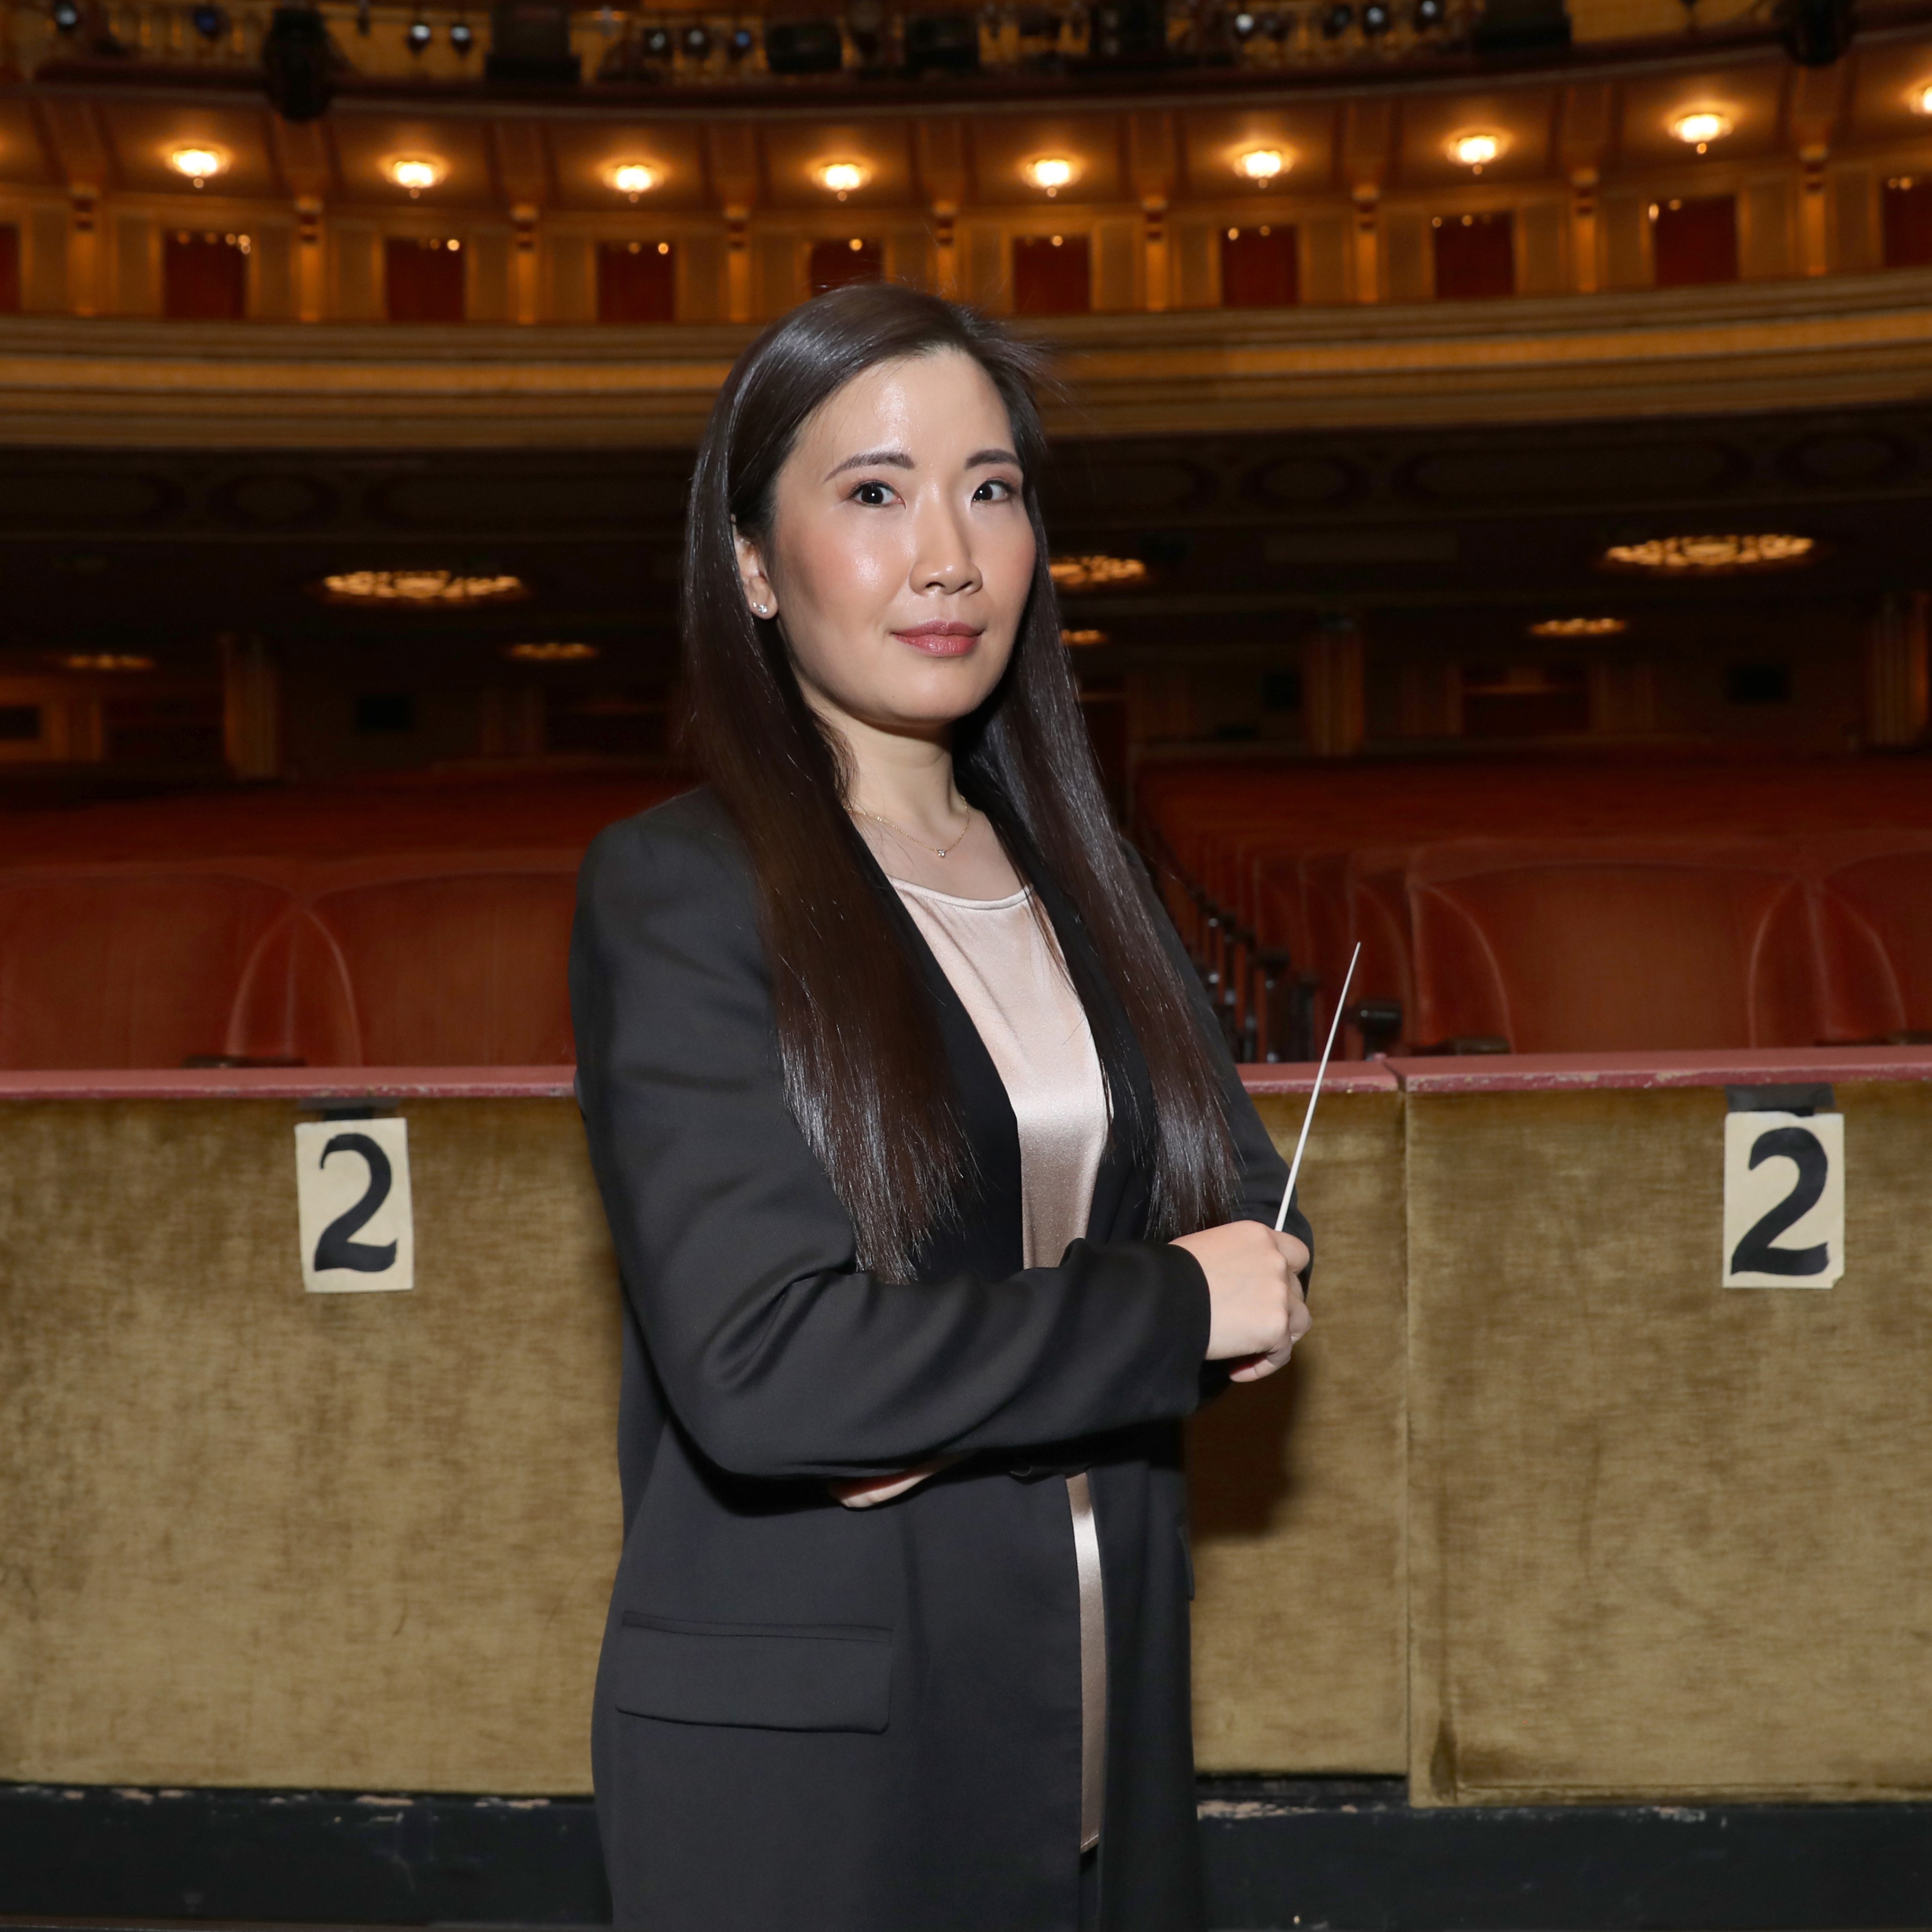 A woman with long, dark hair is standing in an empty theater, holding a conductor's baton, wearing a black blazer. The backdrop features red seats and warm lighting.